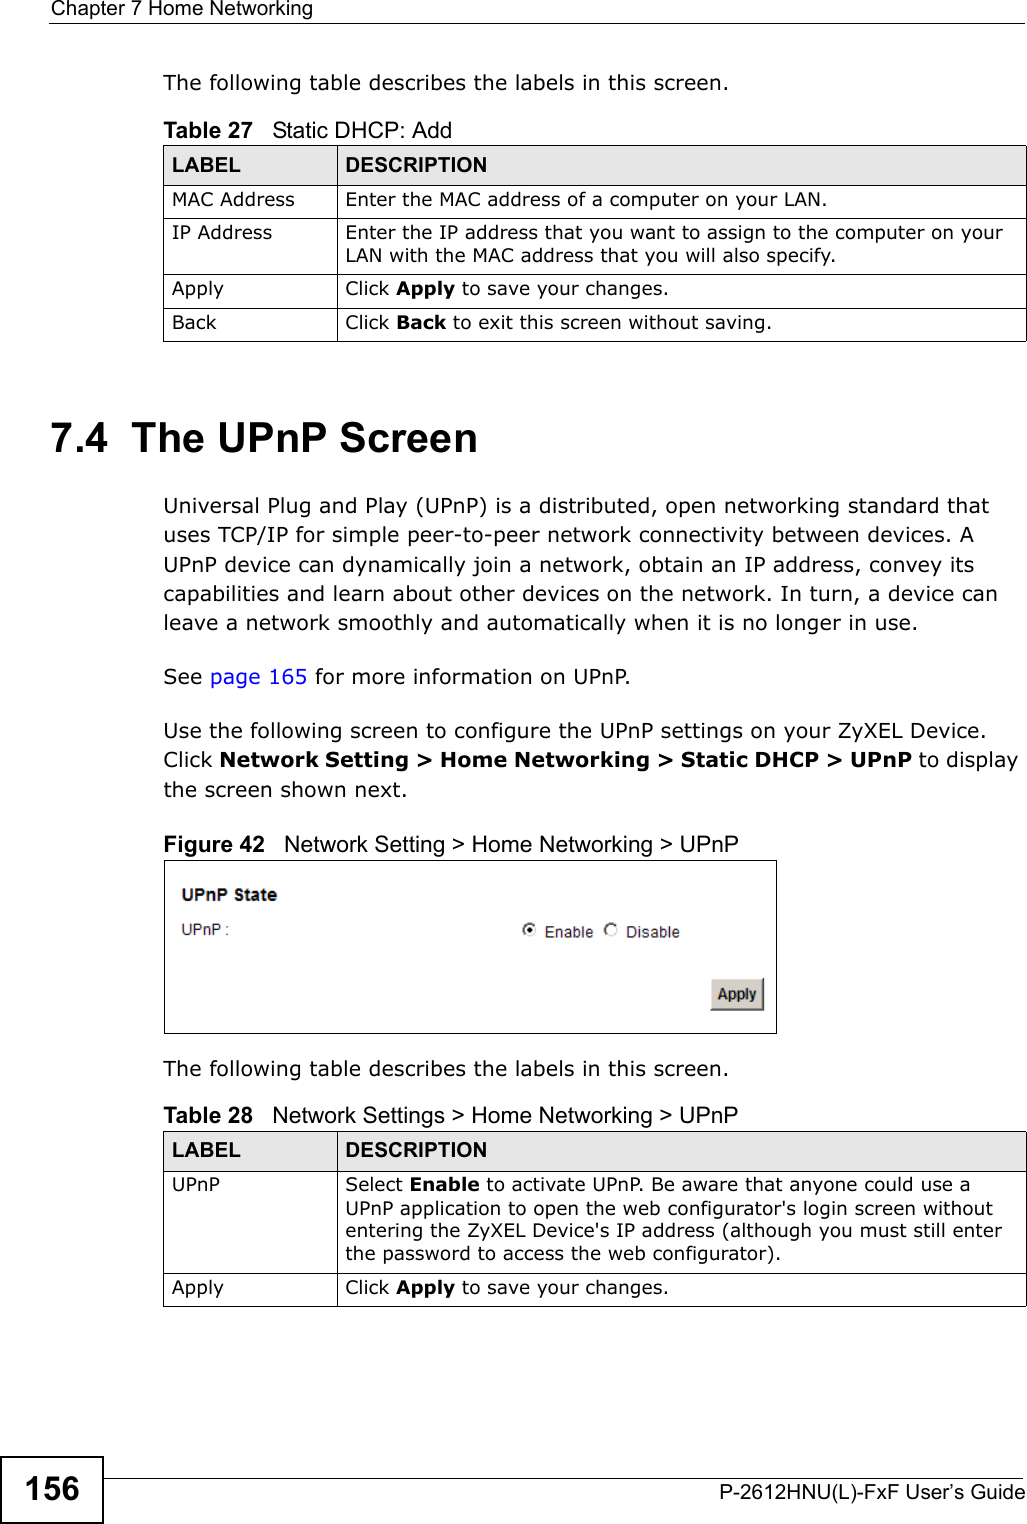 Chapter 7 Home NetworkingP-2612HNU(L)-FxF User’s Guide156The following table describes the labels in this screen.7.4  The UPnP ScreenUniversal Plug and Play (UPnP) is a distributed, open networking standard that uses TCP/IP for simple peer-to-peer network connectivity between devices. AUPnP device can dynamically join a network, obtain an IP address, convey its capabilities and learn about other devices on the network. In turn, a device can leave a network smoothly and automatically when it is no longer in use.See page 165 for more information on UPnP.Use the following screen to configure the UPnP settings on your ZyXEL Device.Click Network Setting &gt; Home Networking &gt; Static DHCP &gt; UPnP to display the screen shown next.Figure 42   Network Setting &gt; Home Networking &gt; UPnPThe following table describes the labels in this screen.Table 27   Static DHCP: AddLABEL DESCRIPTIONMAC Address Enter the MAC address of a computer on your LAN.IP Address Enter the IP address that you want to assign to the computer on your LAN with the MAC address that you will also specify.Apply Click Apply to save your changes.Back Click Back to exit this screen without saving.Table 28   Network Settings &gt; Home Networking &gt; UPnPLABEL DESCRIPTIONUPnP Select Enable to activate UPnP. Be aware that anyone could use a UPnP application to open the web configurator&apos;s login screen without entering the ZyXEL Device&apos;s IP address (although you must still enter the password to access the web configurator).Apply Click Apply to save your changes.